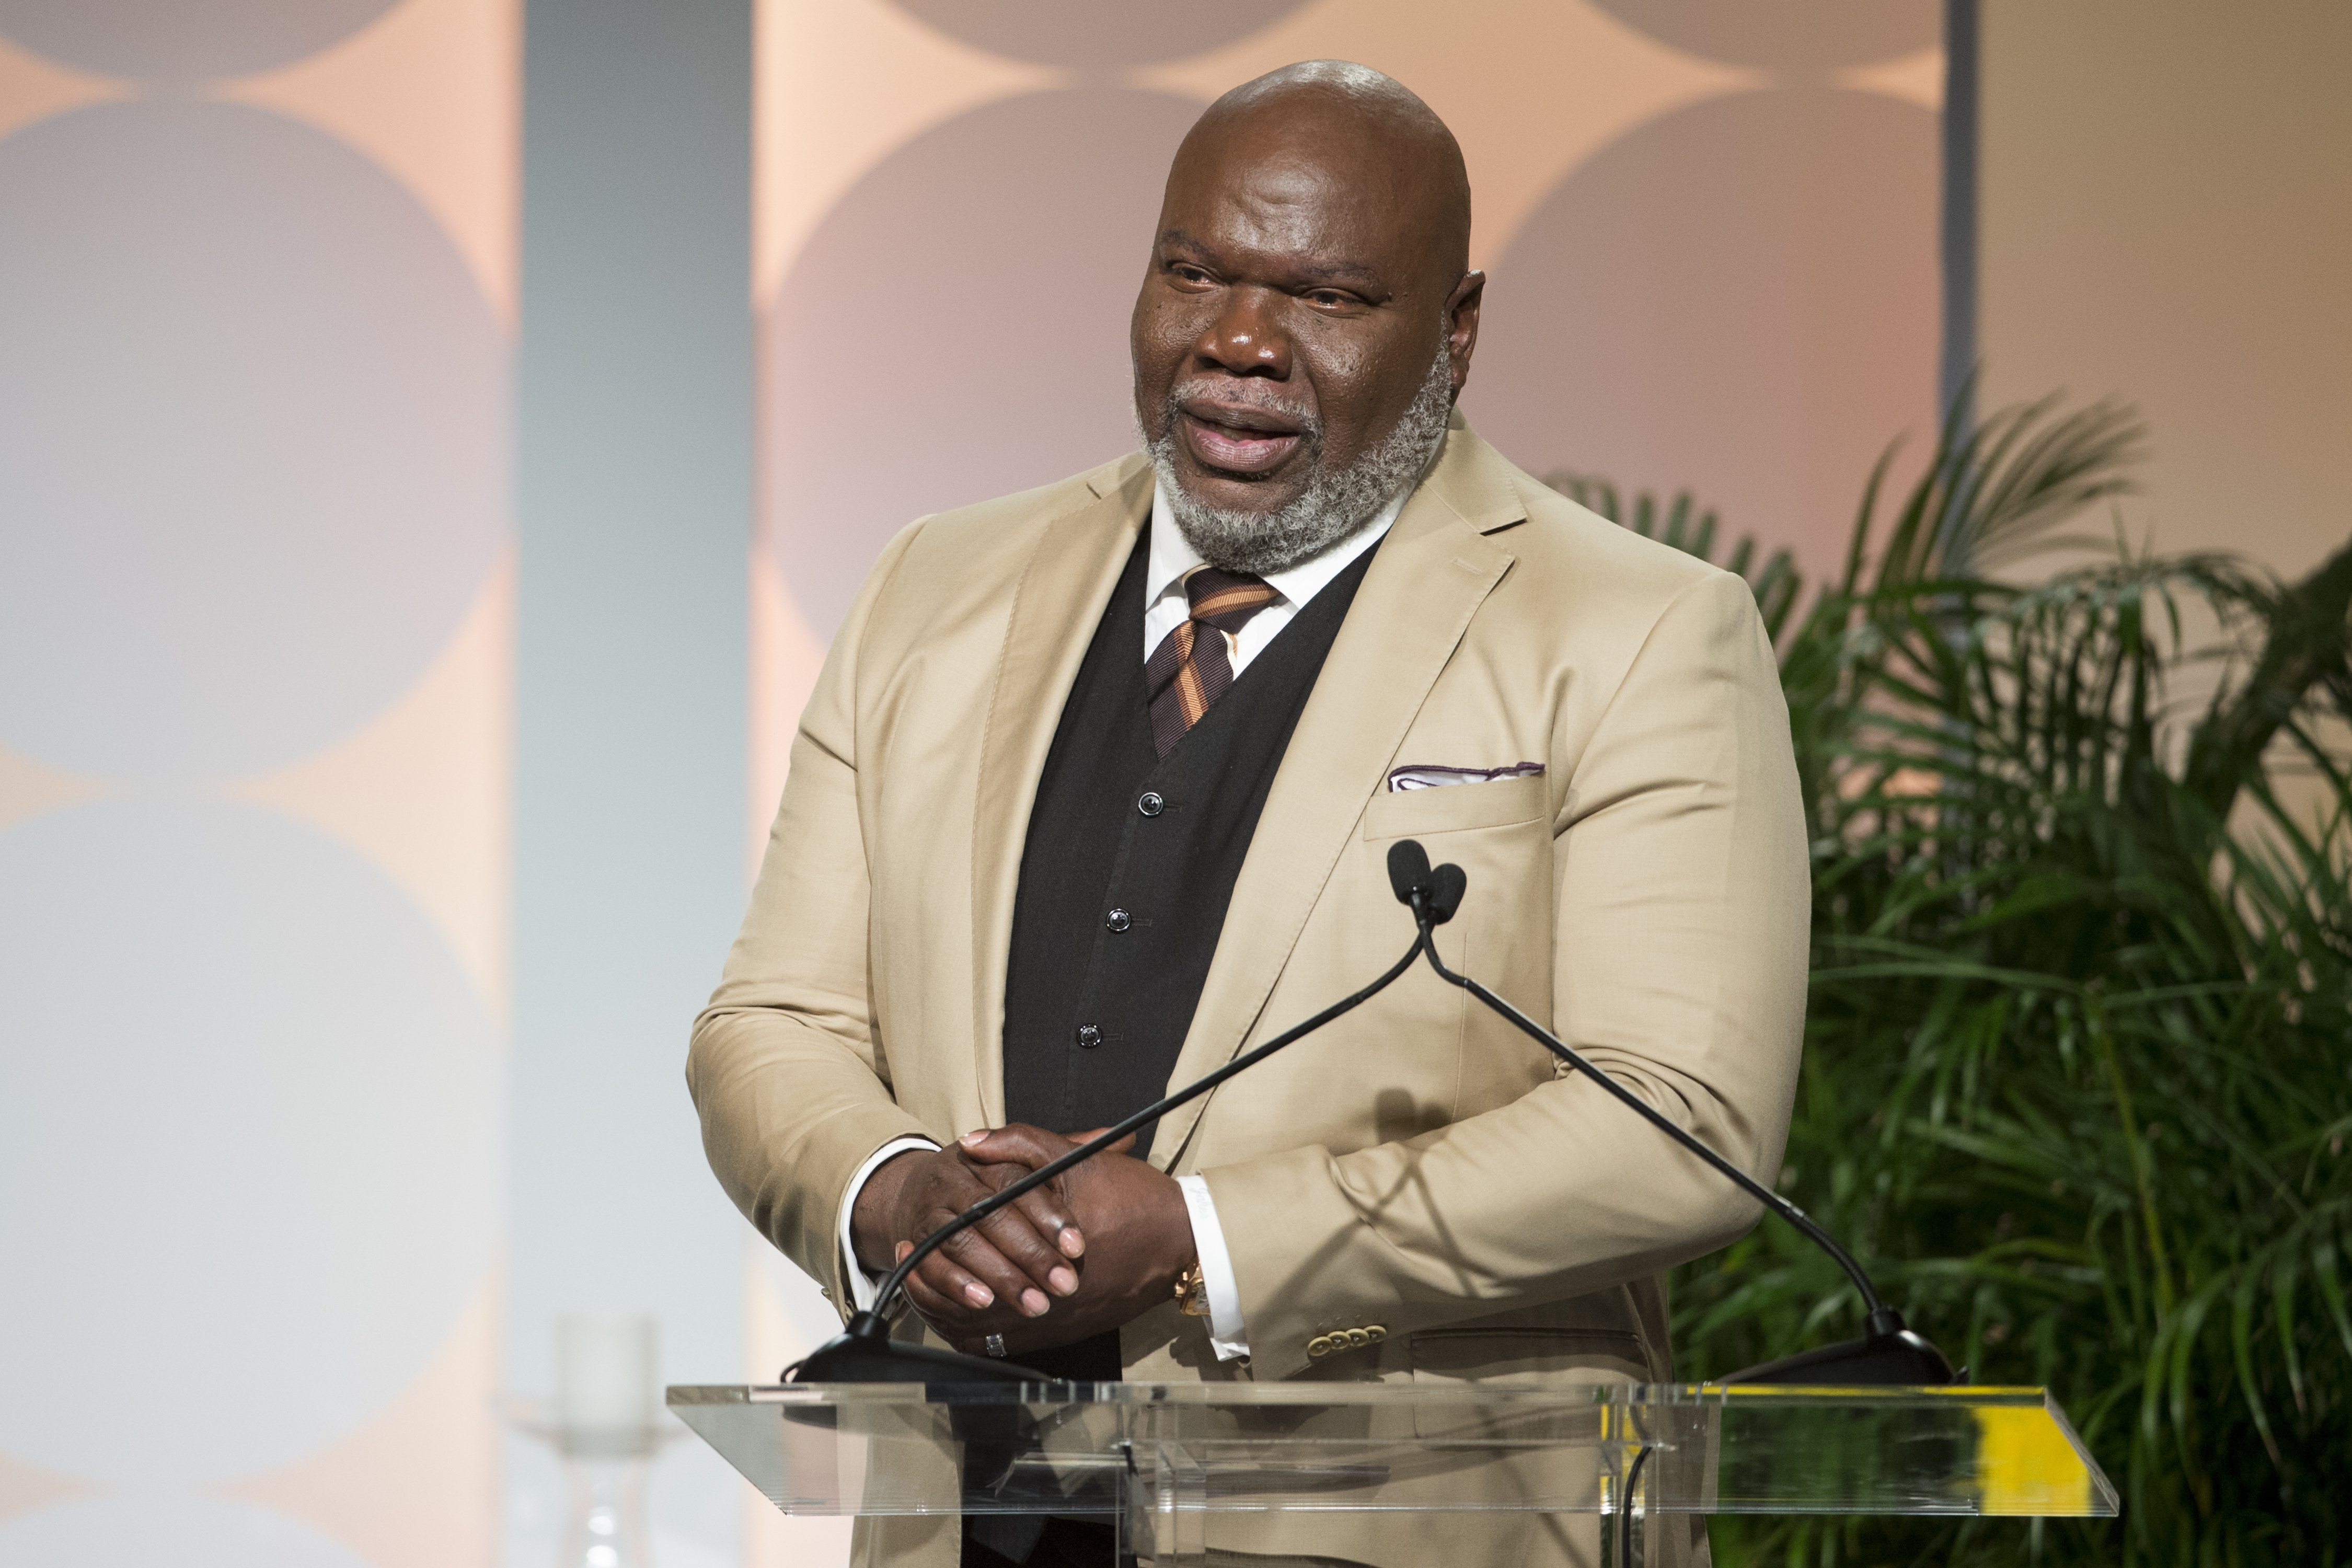 Bishop T.D. Jakes at MegaFest's International Faith & Family Film Festival on June 30, 2017 in Dallas, Texas. | Source: Getty Images